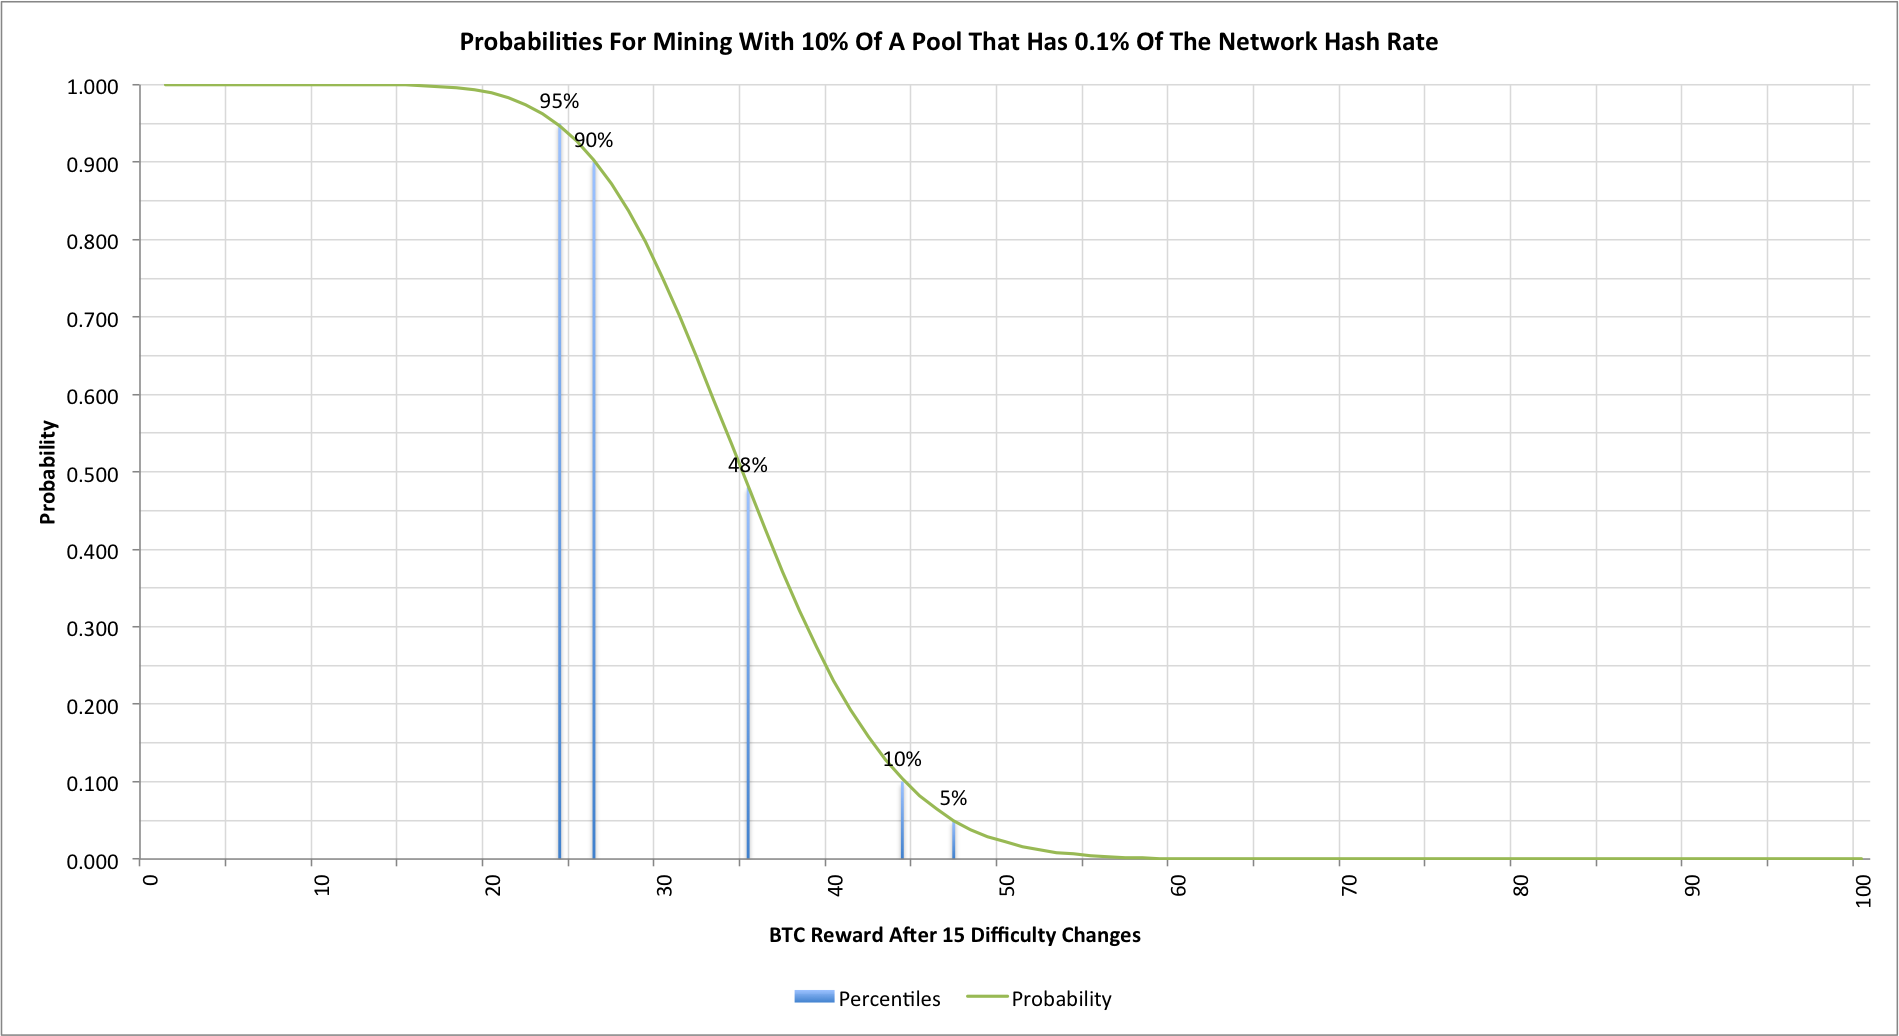 Bitcoin mining reward with 10% of a pool that has 0.1% of the total network hash rate